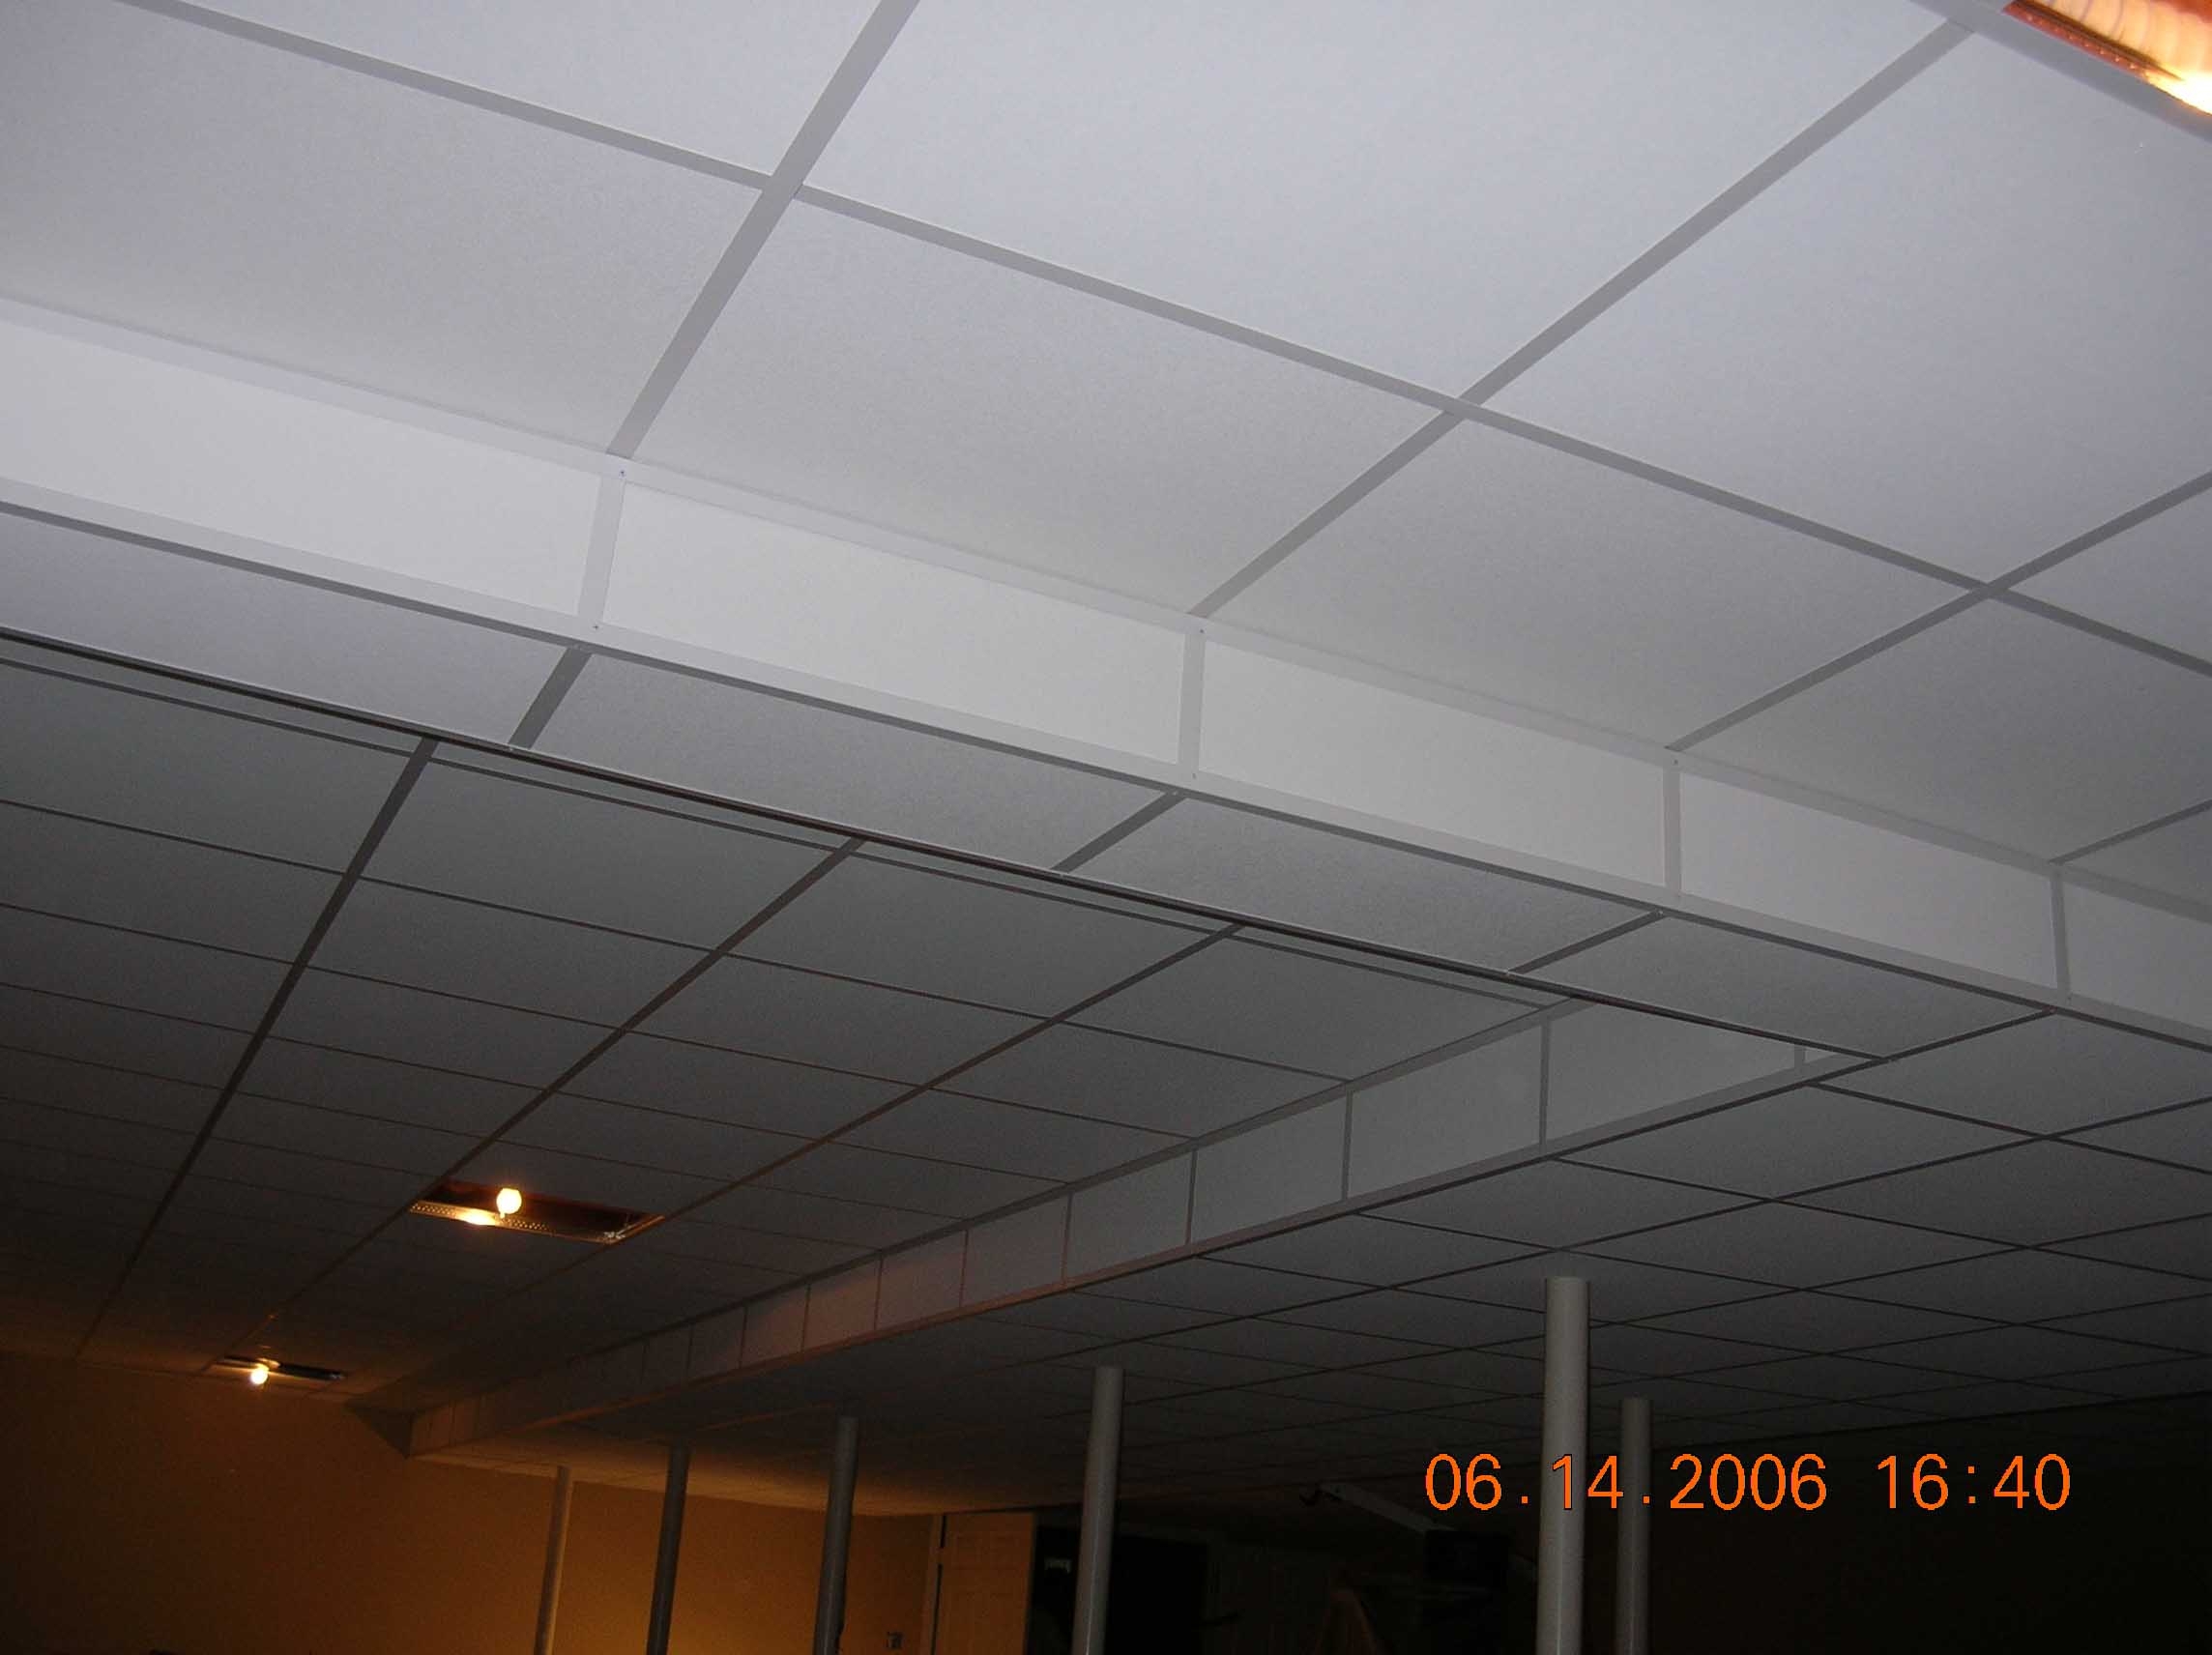 Old Style Drop Ceiling Tiles Old Style Drop Ceiling Tiles old style drop ceiling tiles ceiling tiles 2288 X 1712